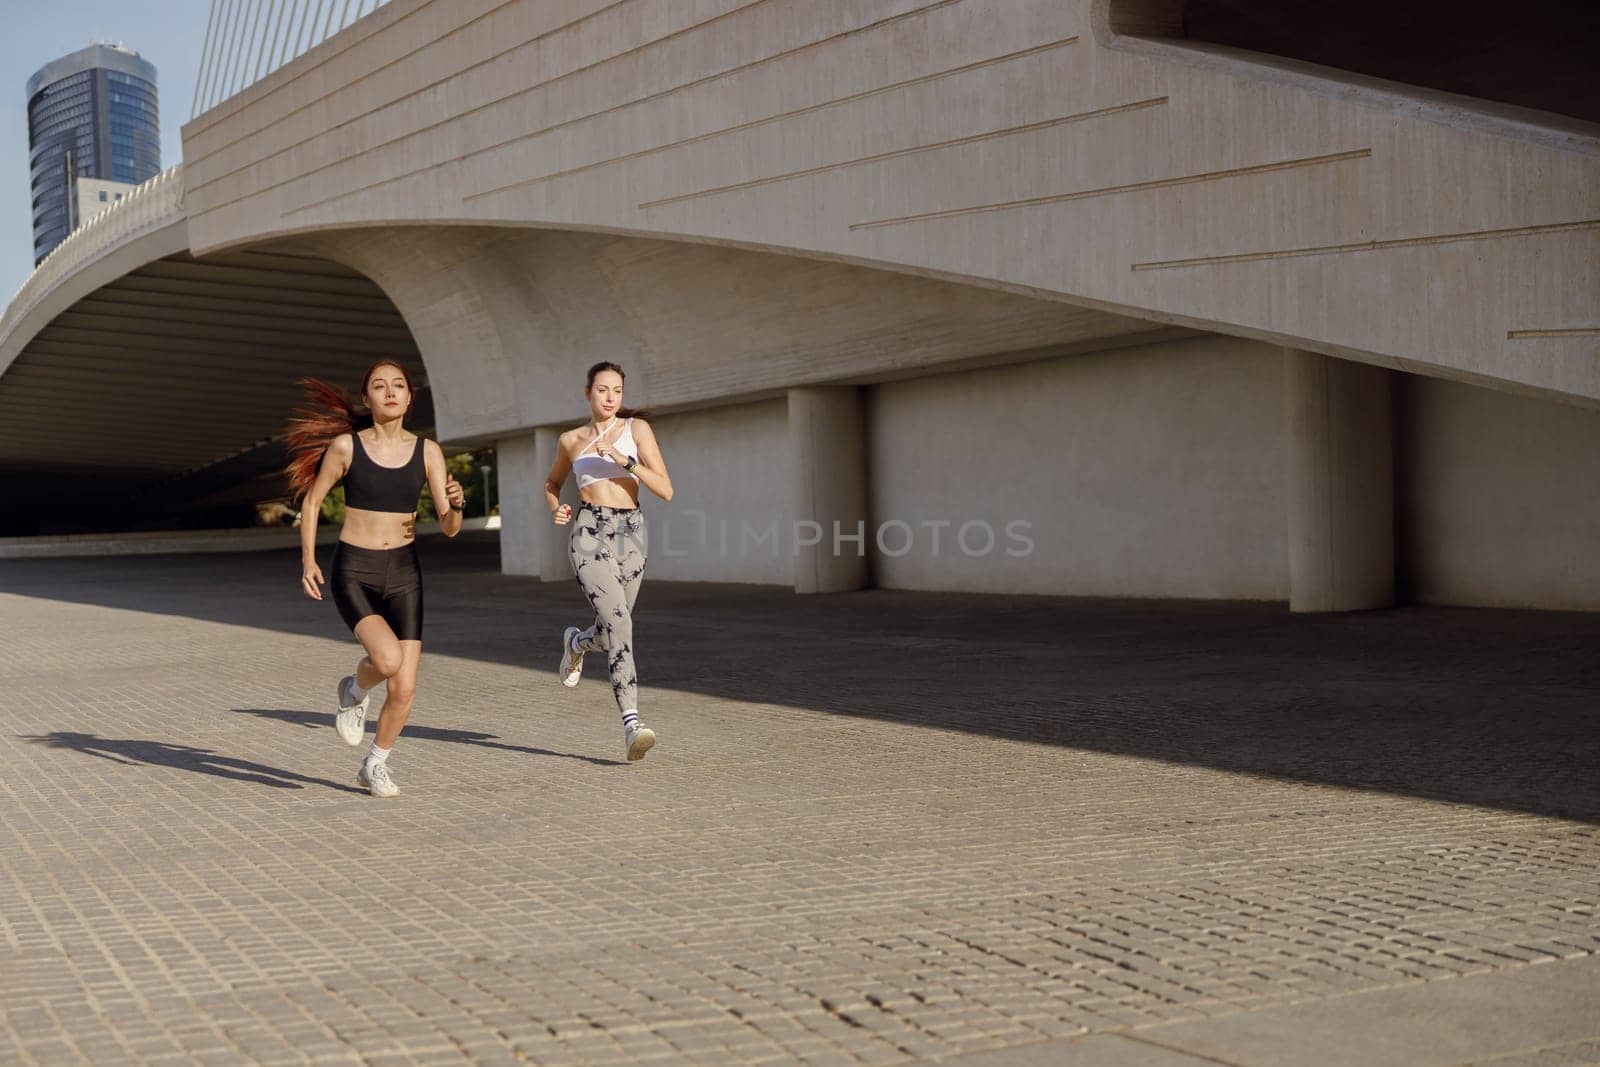 Two active women athlete running side by side along an outdoor track on modern building background by Yaroslav_astakhov